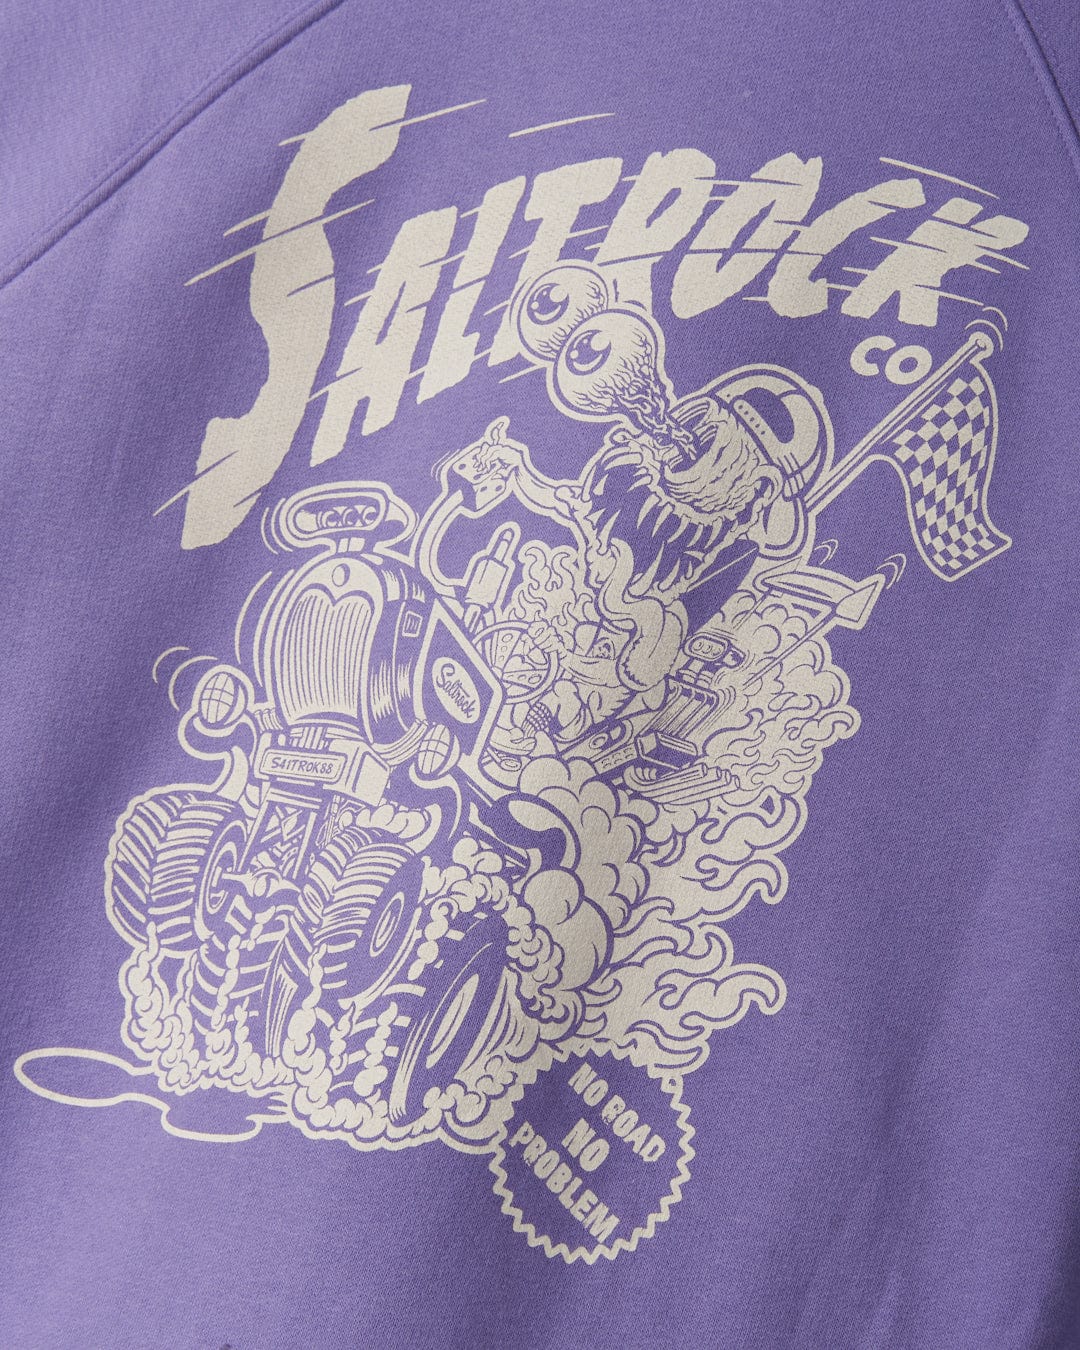 Saltrock Purple No Road No Problem Recycled Kids Zip Hoodie featuring a white graphic design with text "sailorger co" and intricate illustrations of motorcycle elements, angel wings, and racing flags.